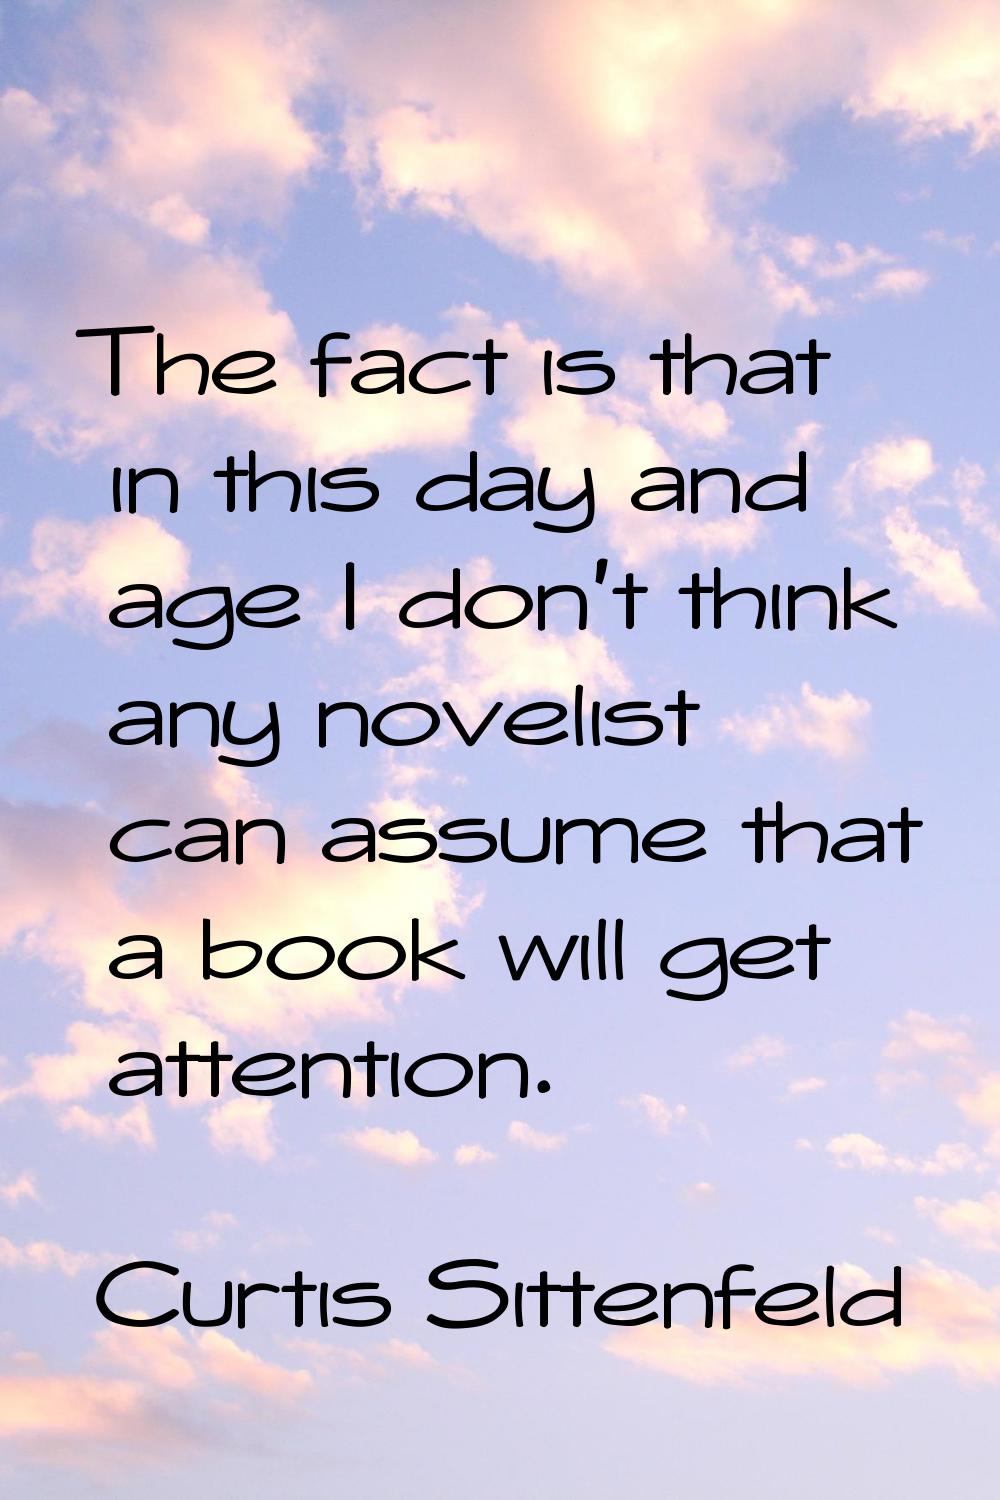 The fact is that in this day and age I don't think any novelist can assume that a book will get att